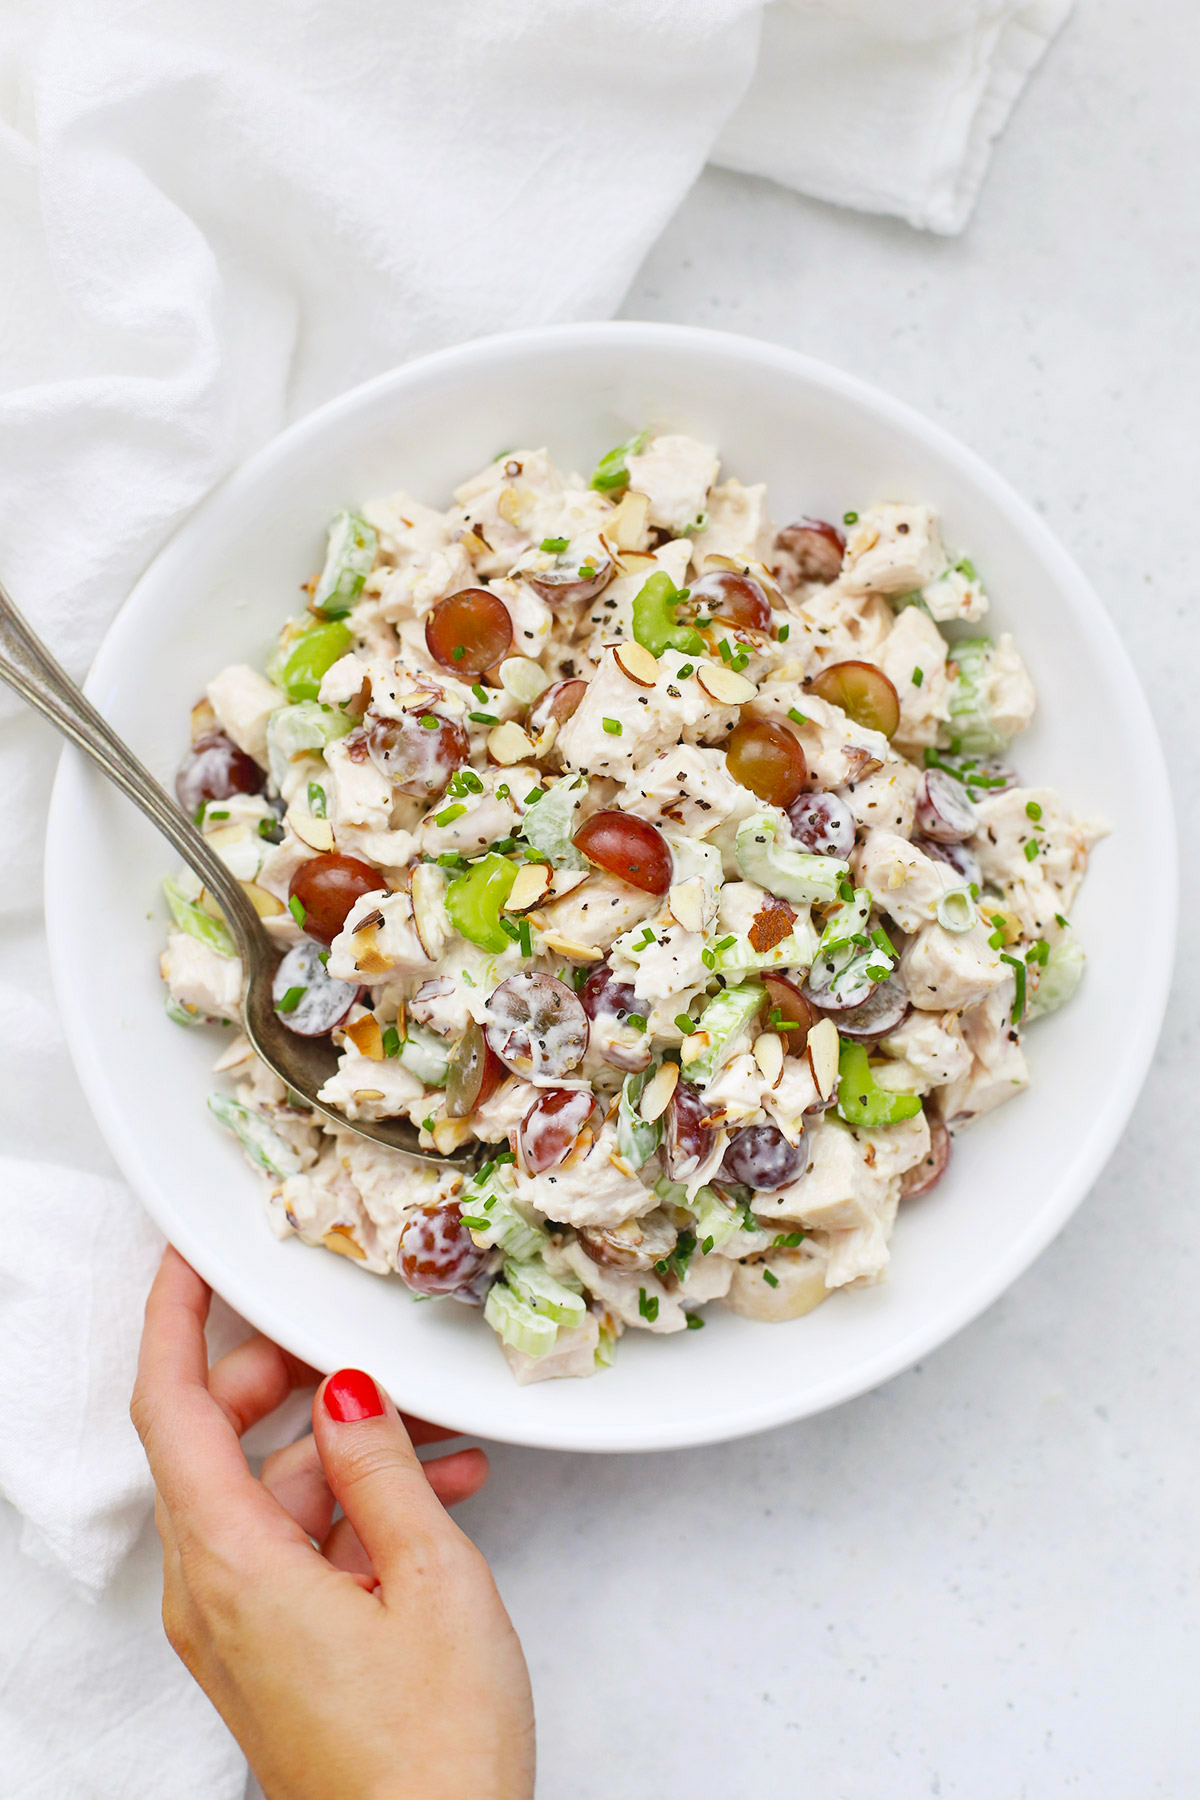 A hand holding a bowl of classic chicken salad on a white background.